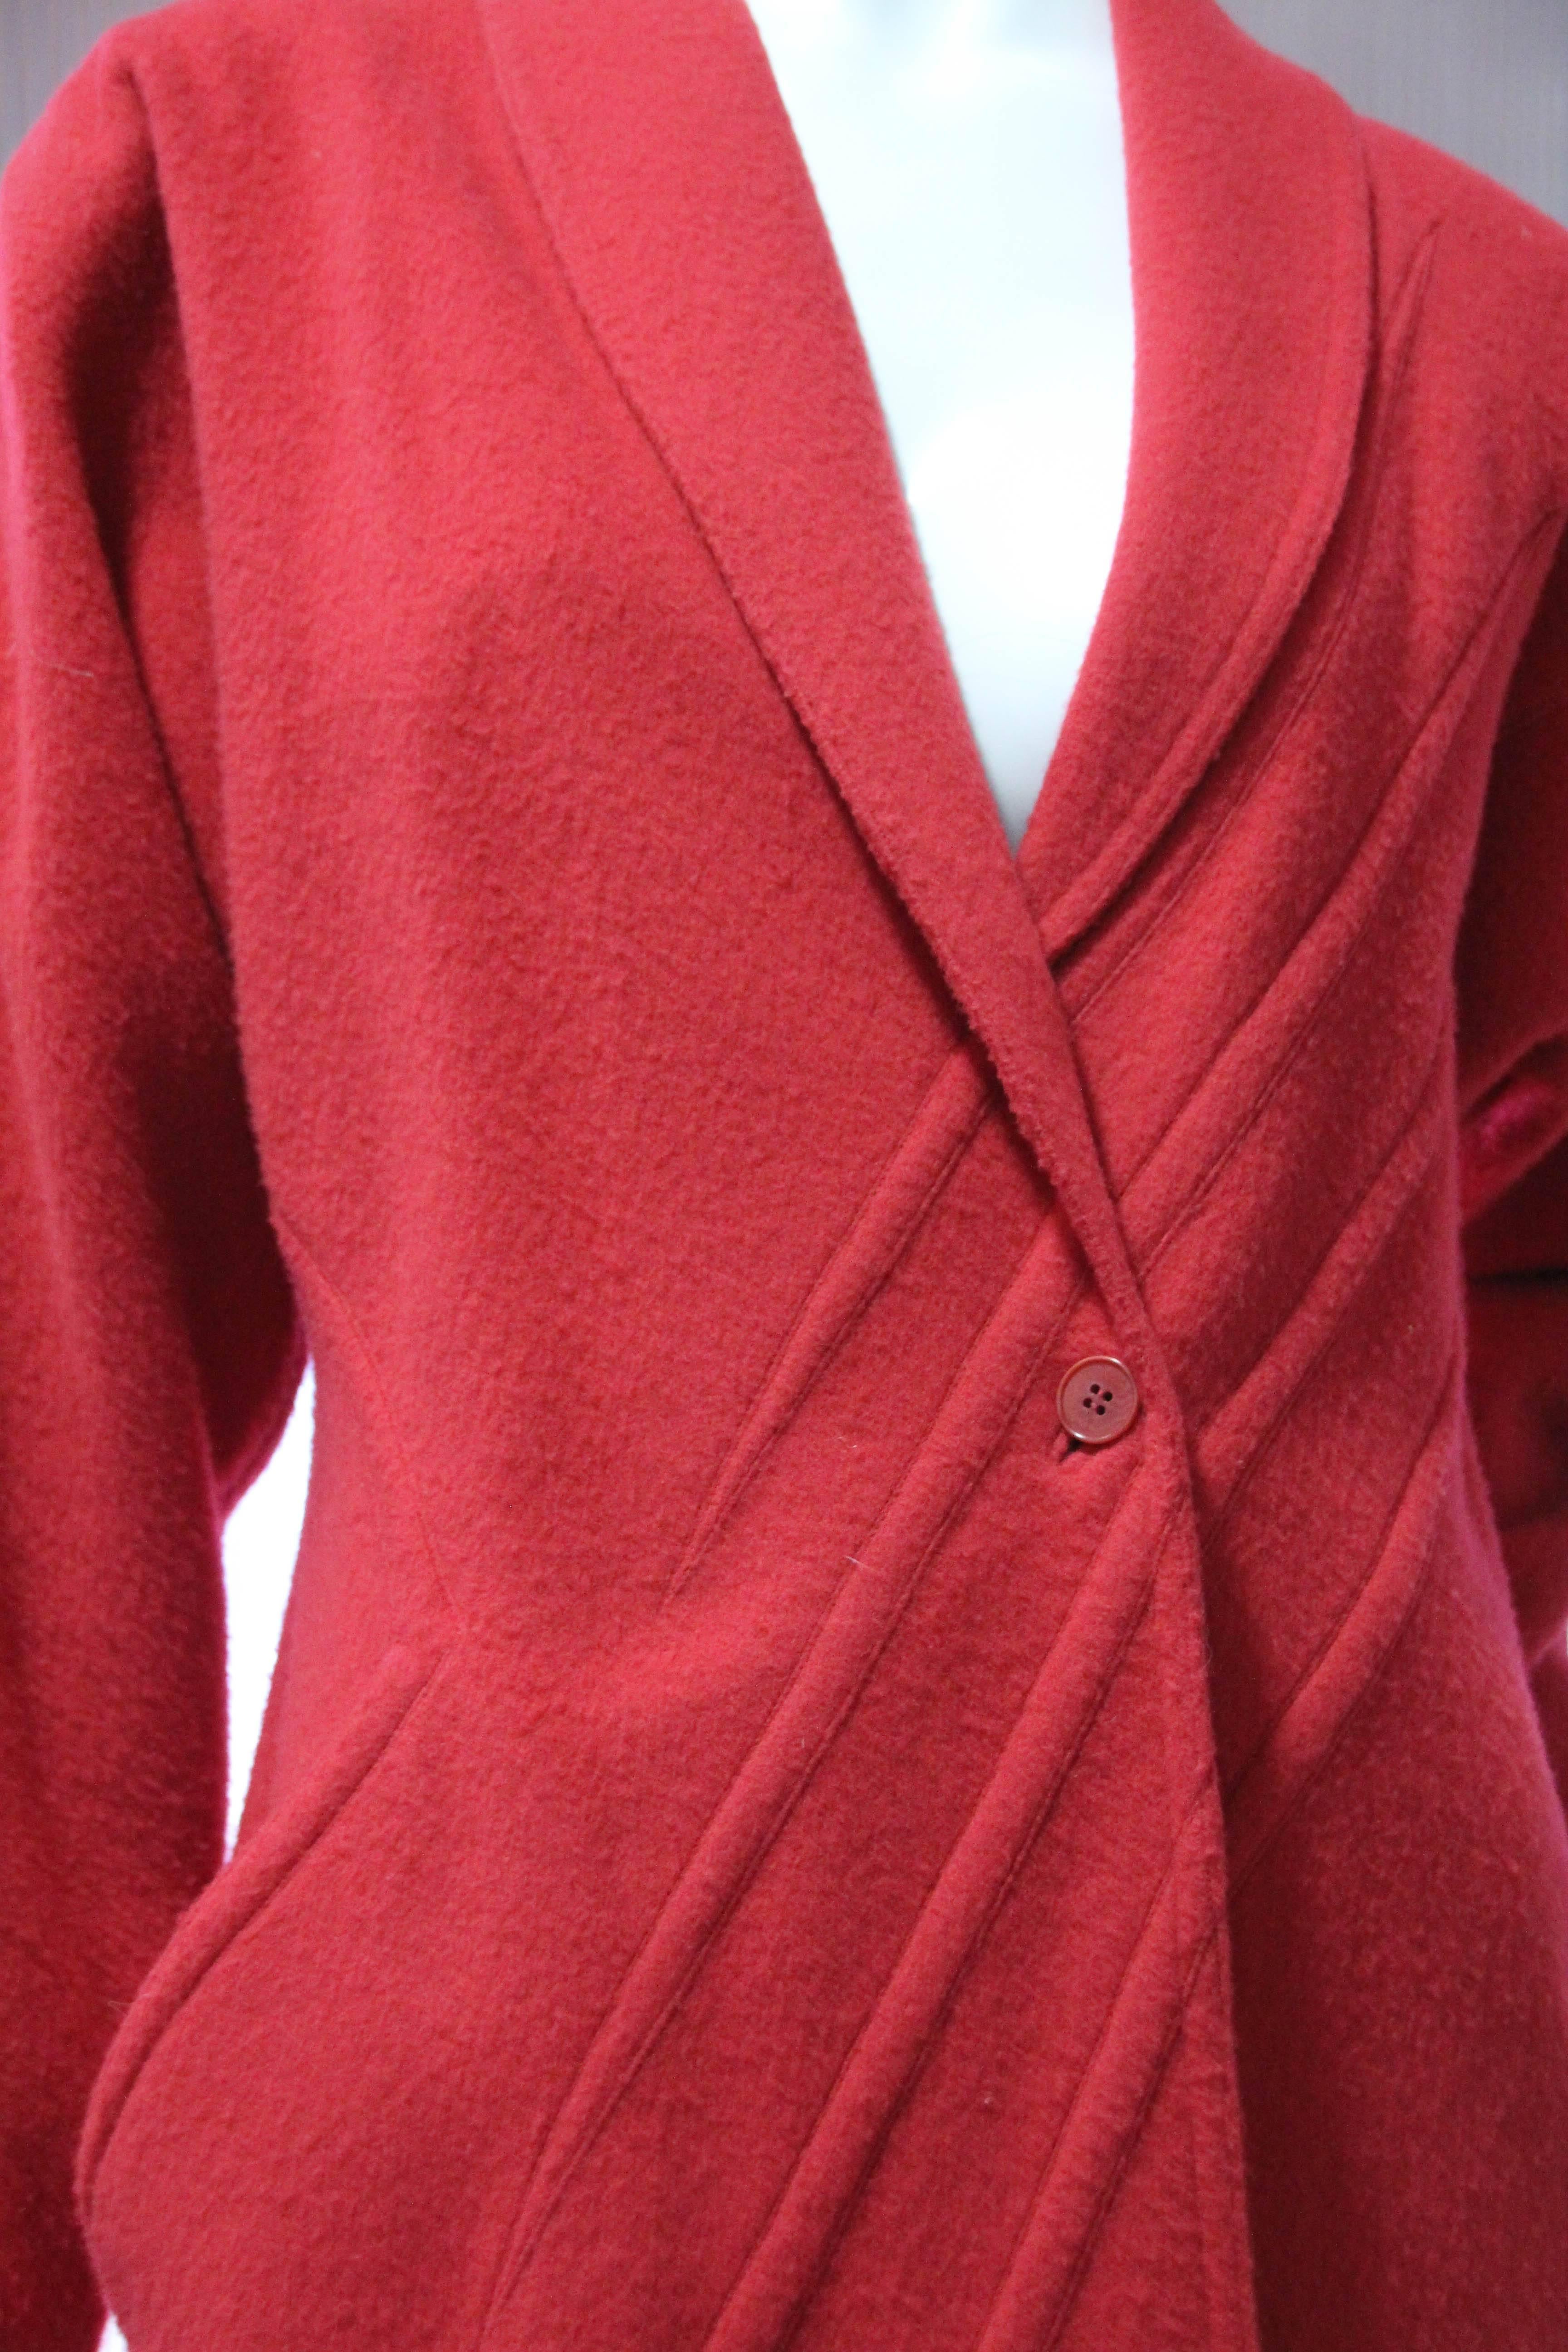 Women's 1980s Gianni Versace Primary Red Wool Coat w Angular Trapunto Stitching Details For Sale